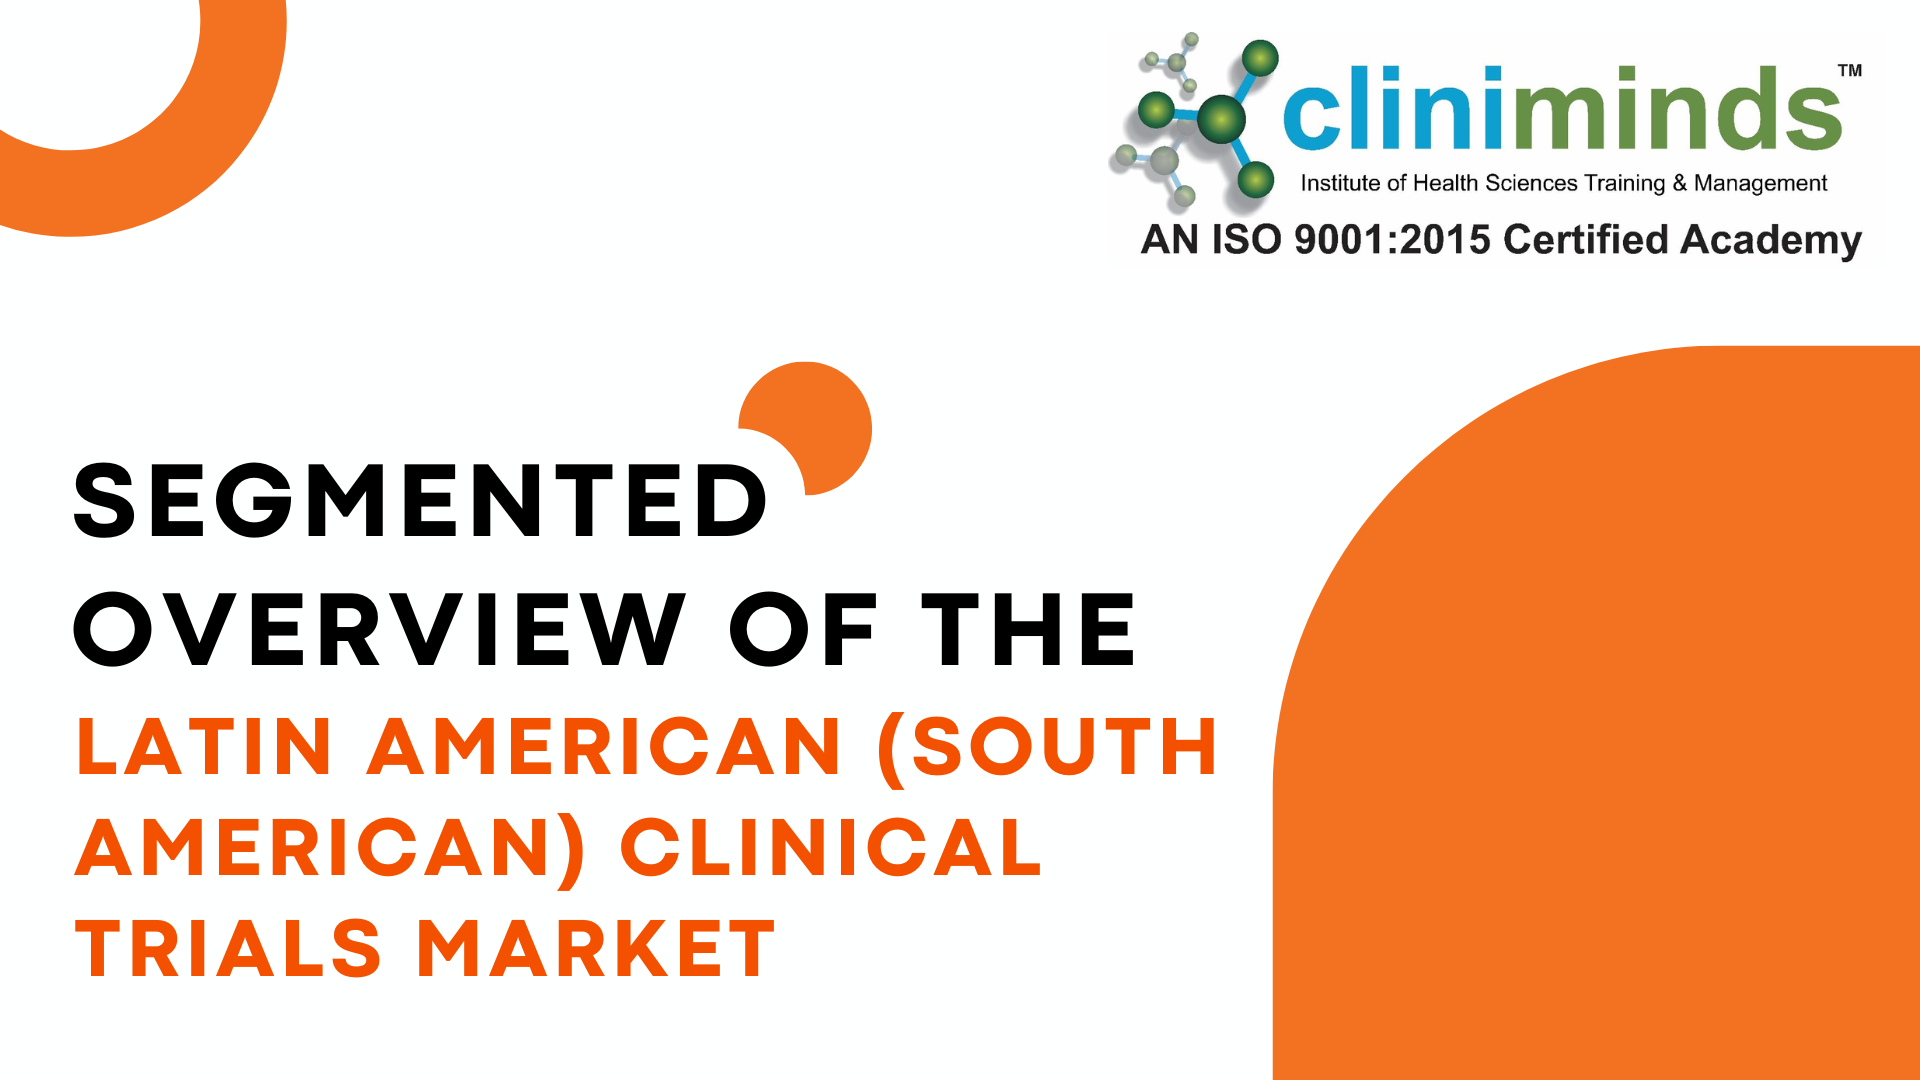 Segmented Overview of the Latin American (South American) Clinical Trials Market